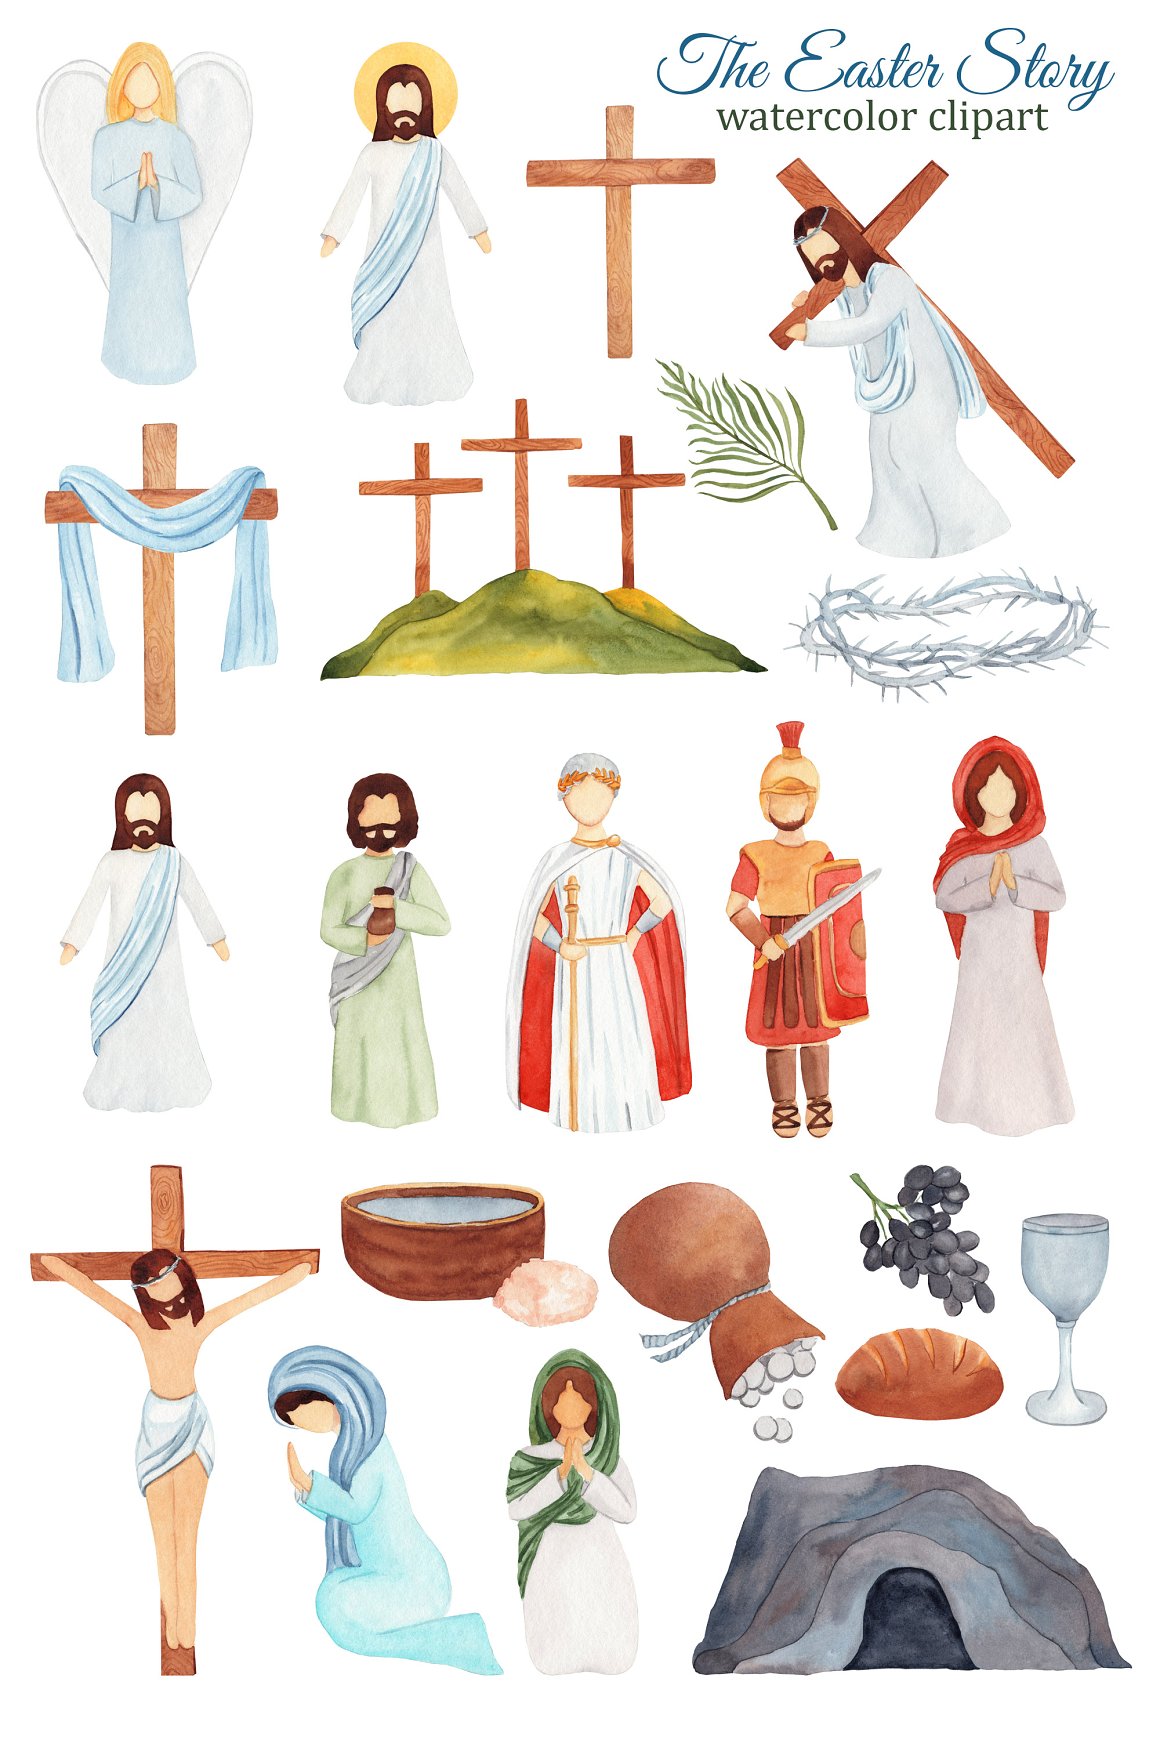 Watercolor religious Easter clipart on a white background.